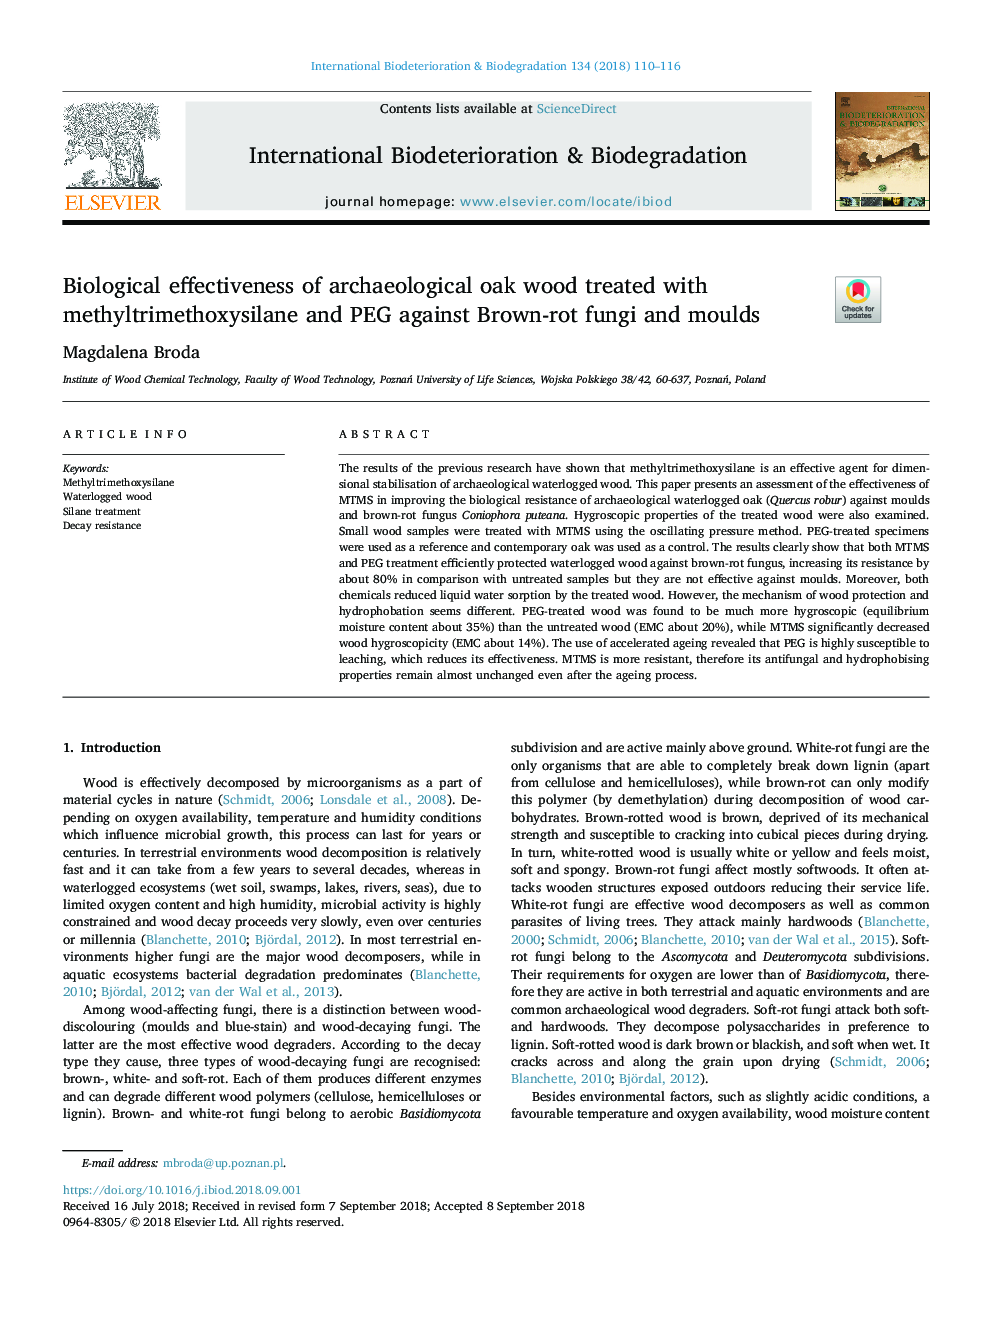 Biological effectiveness of archaeological oak wood treated with methyltrimethoxysilane and PEG against Brown-rot fungi and moulds